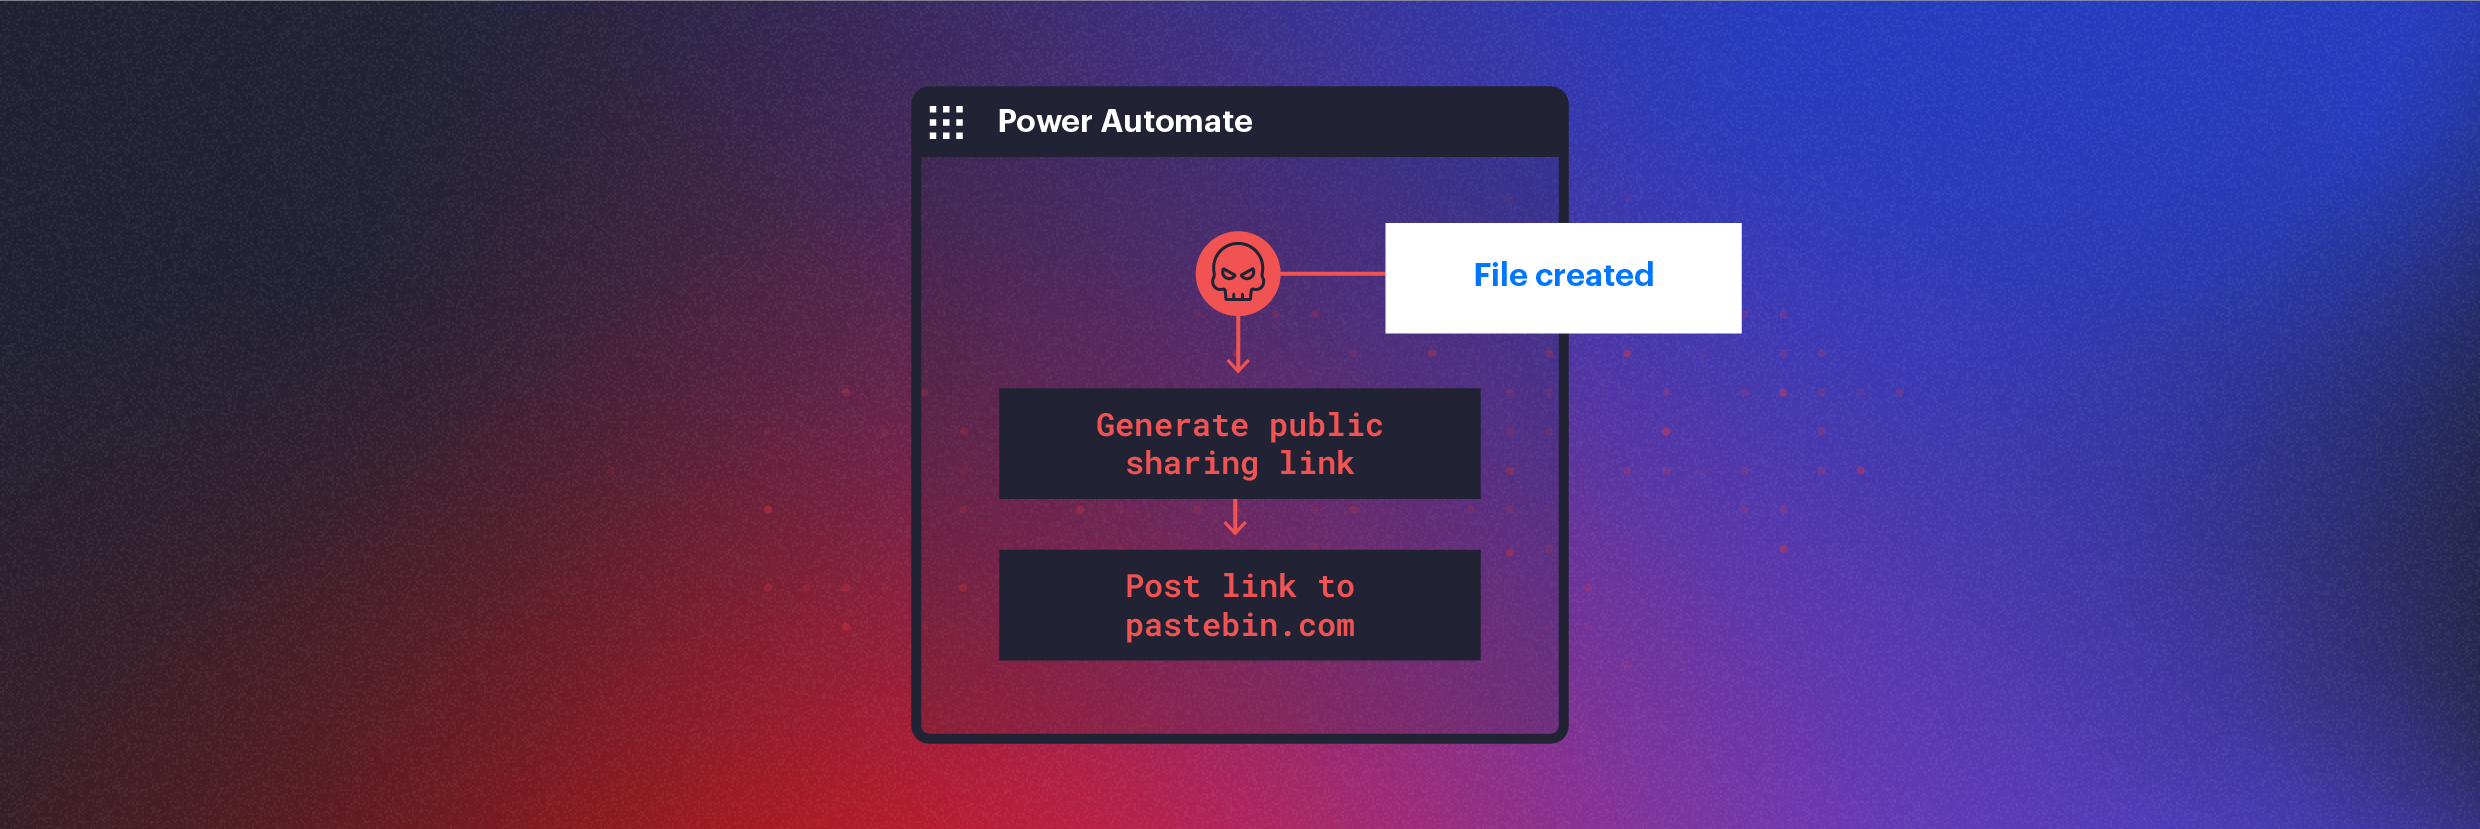 Using Power Automate for Covert Data Exfiltration in Microsoft 365